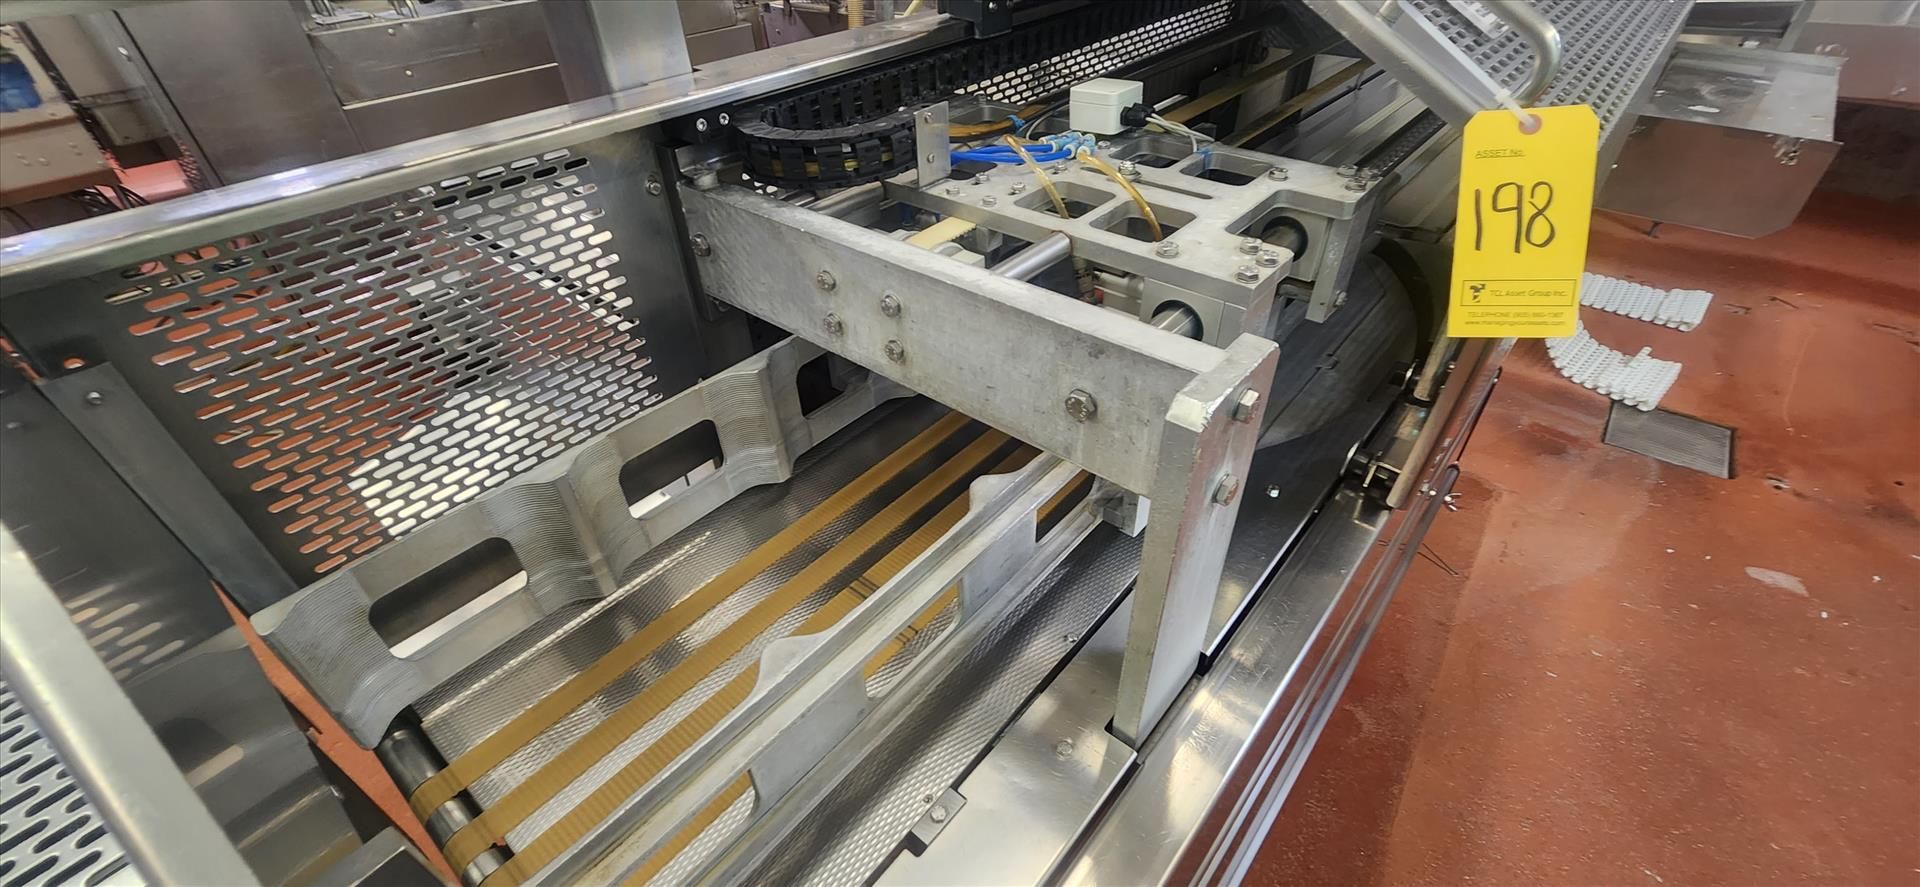 MultiVac tray sealer, mod. T400, stainless steel w/ infeed conveyor [Loc. Cut-Up] - Image 4 of 6